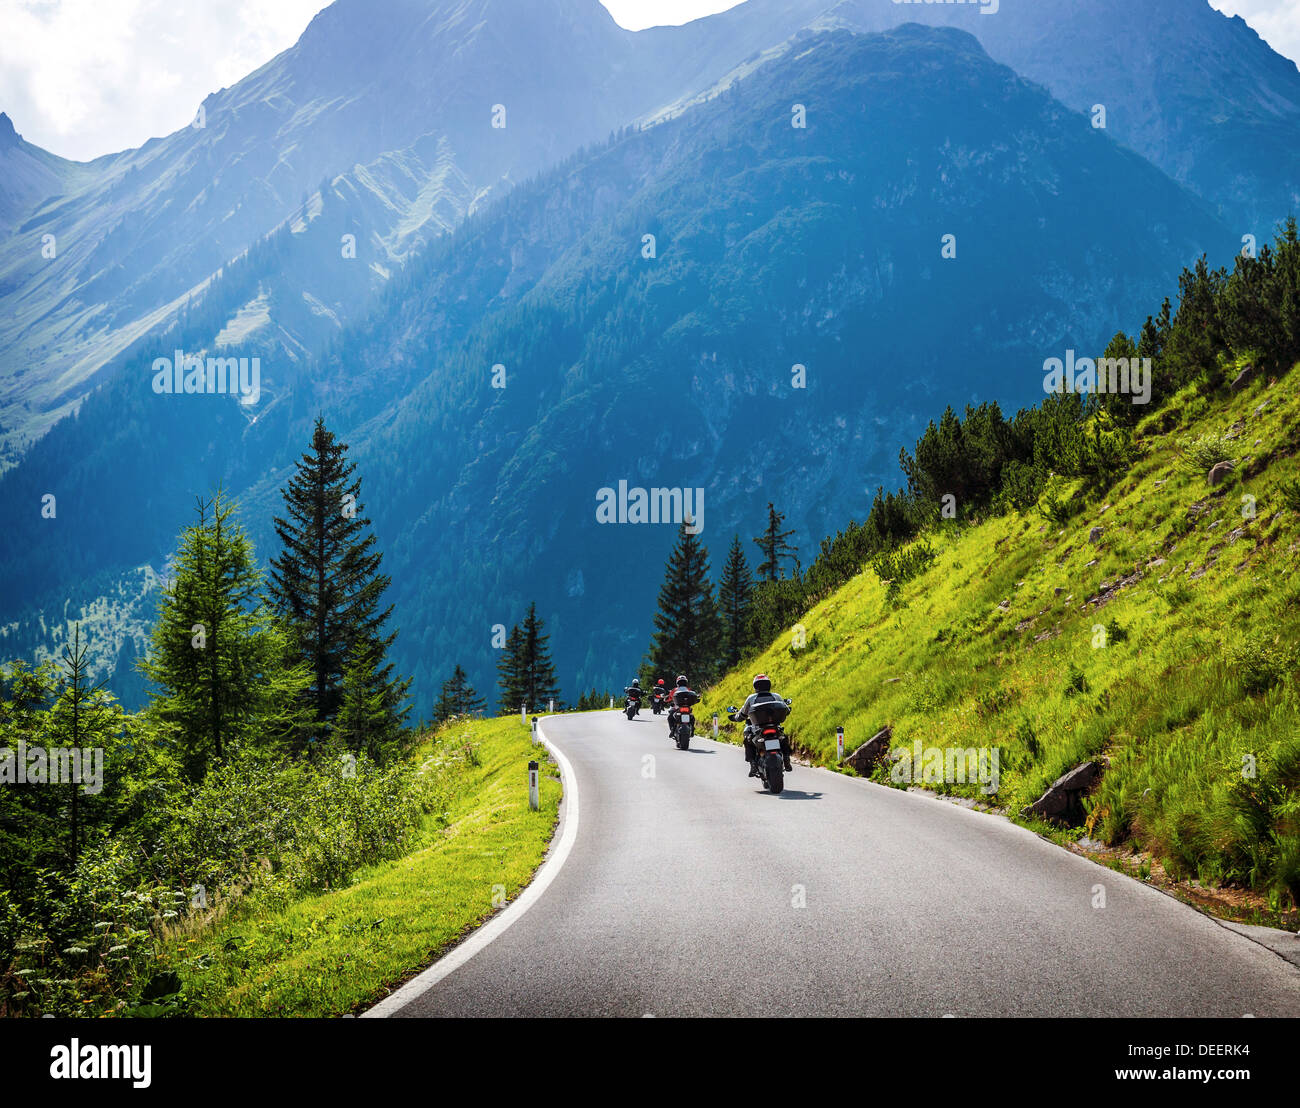 Moto racers riding on mountainous road, drive a motorcycle, summer adventure, extreme sport, travel to Europe, active lifestyle Stock Photo